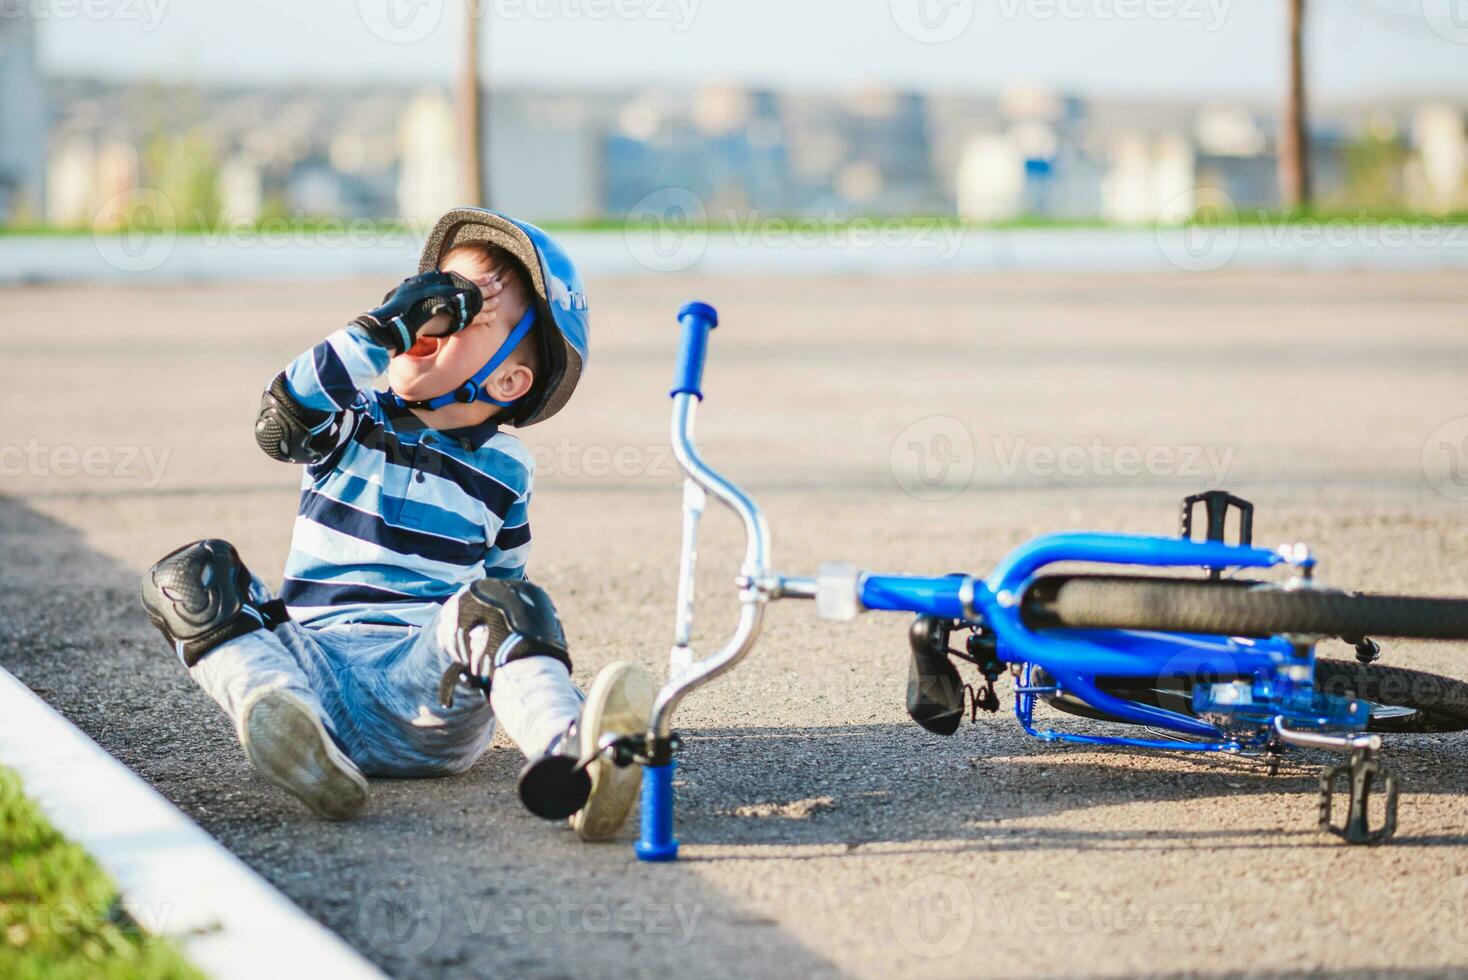 A small child fell from a bicycle onto the road, crying and screaming in pain. photo